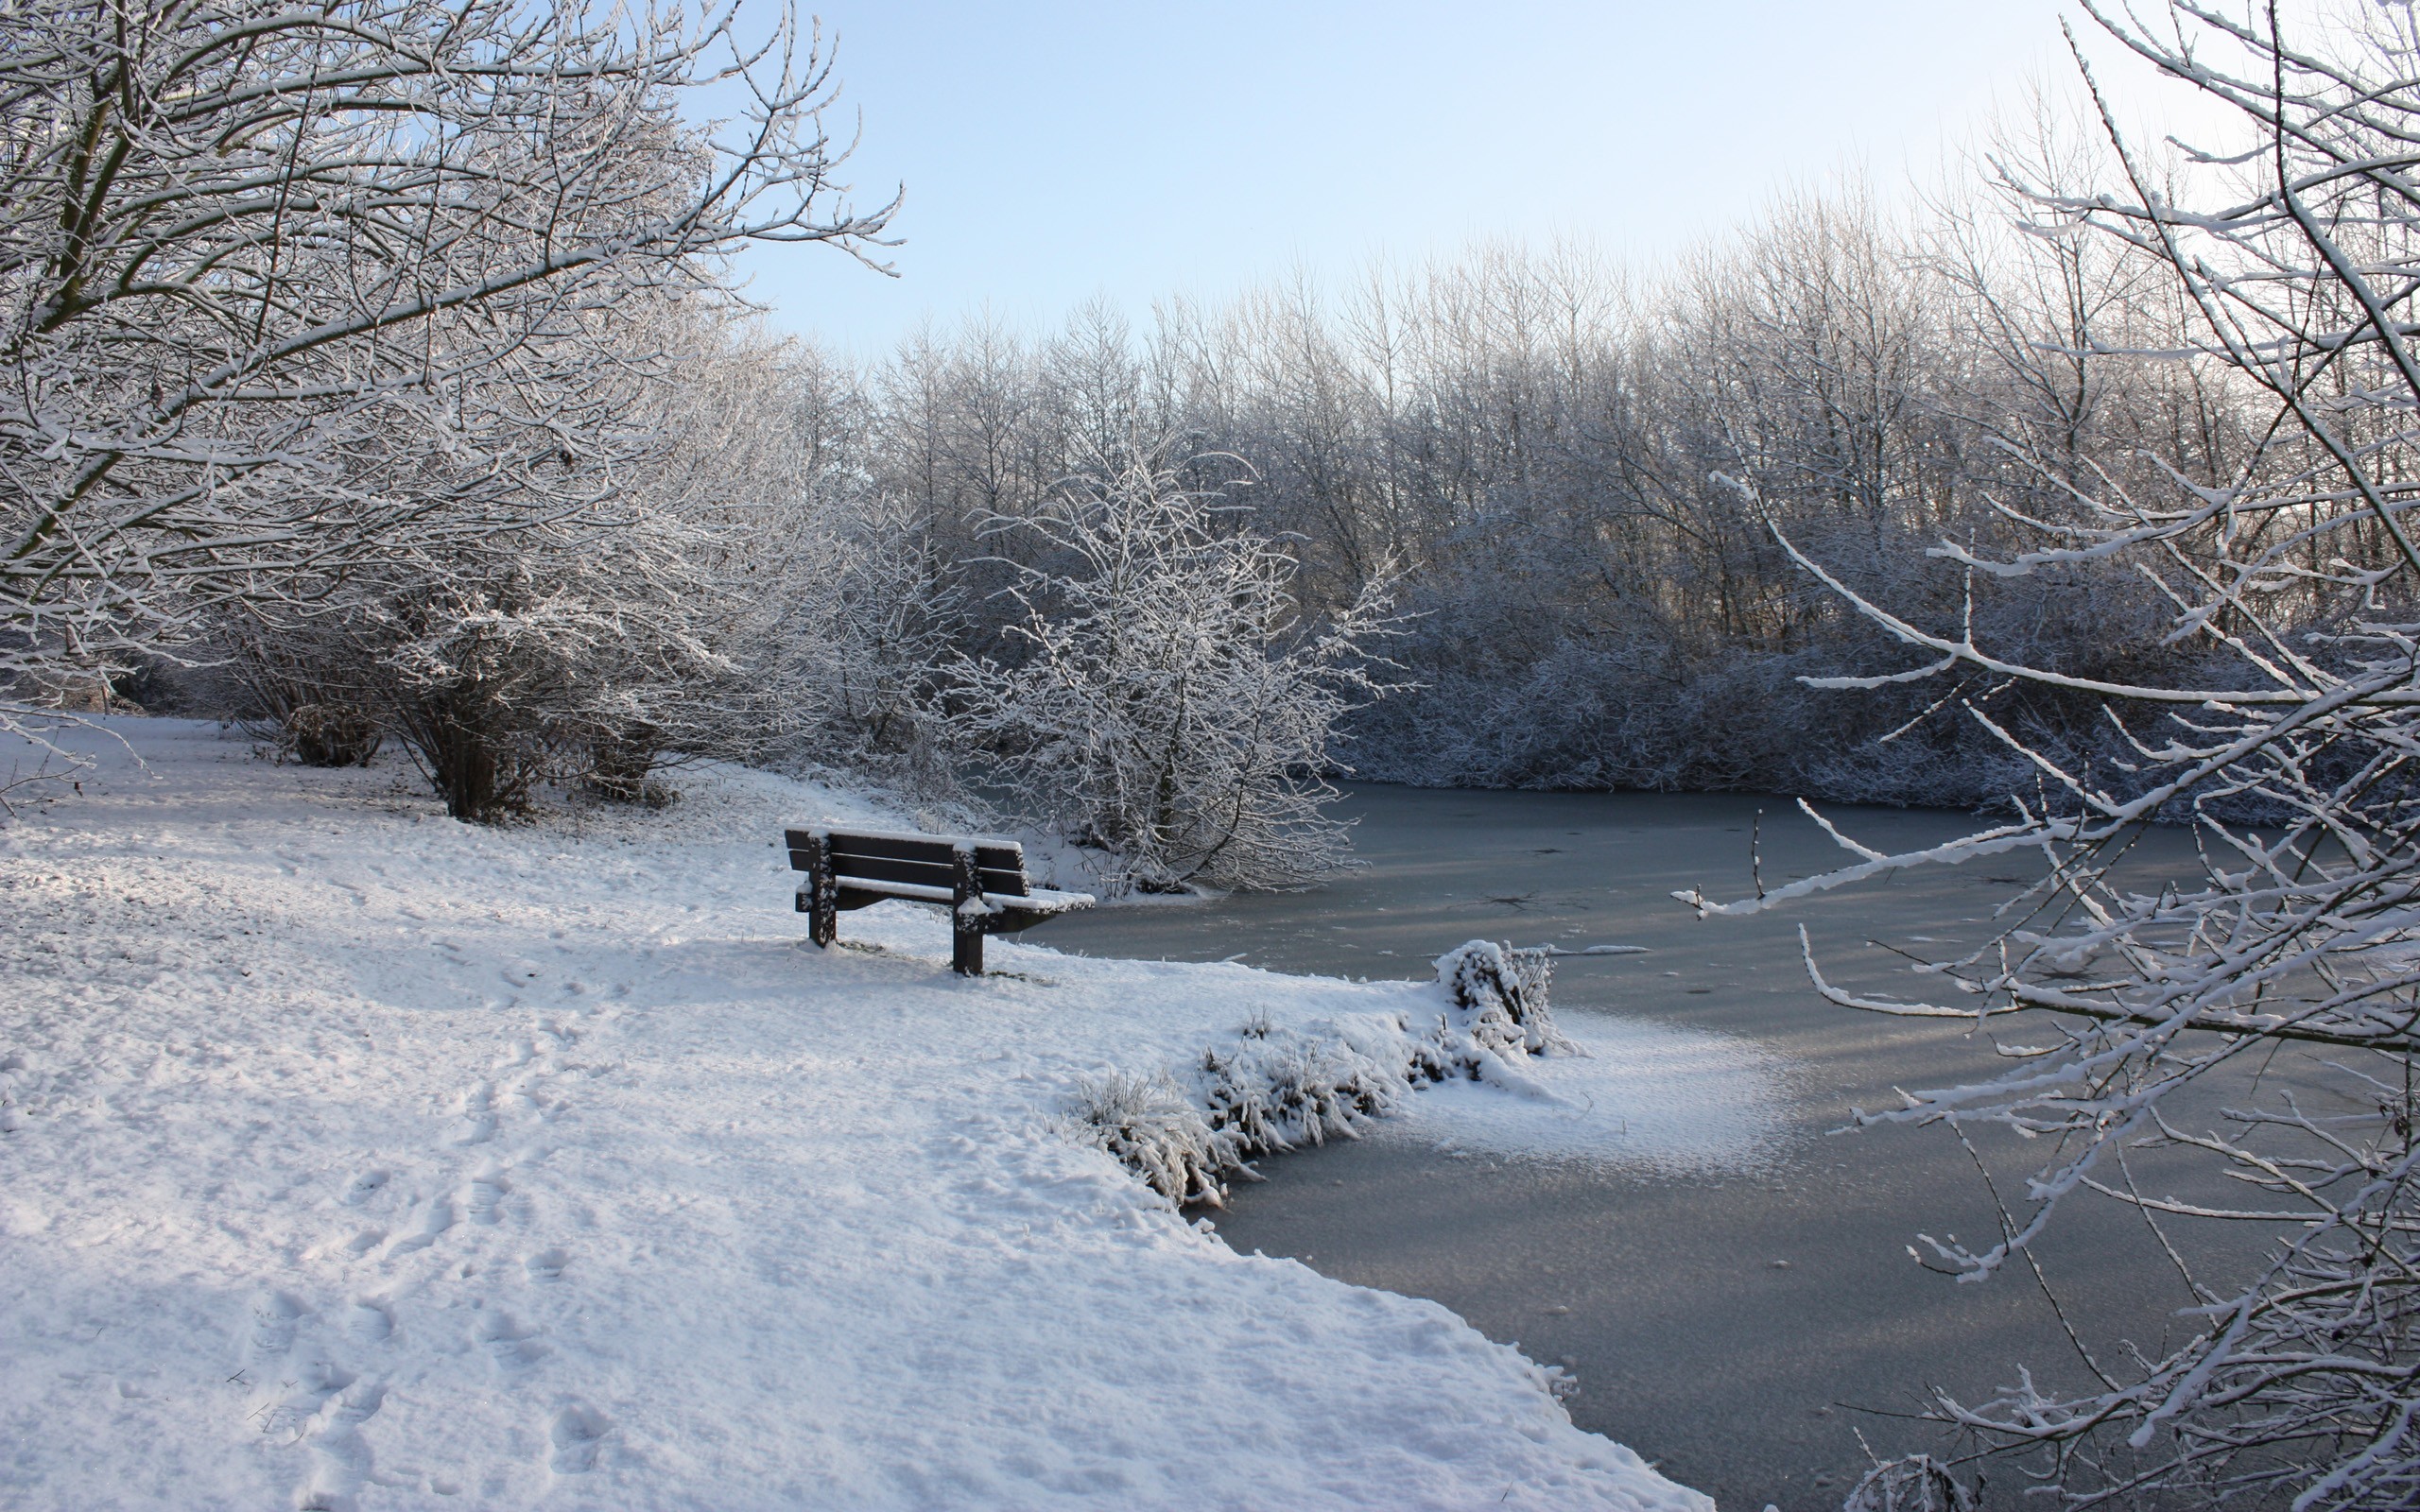 General 2560x1600 bench snow winter outdoors river